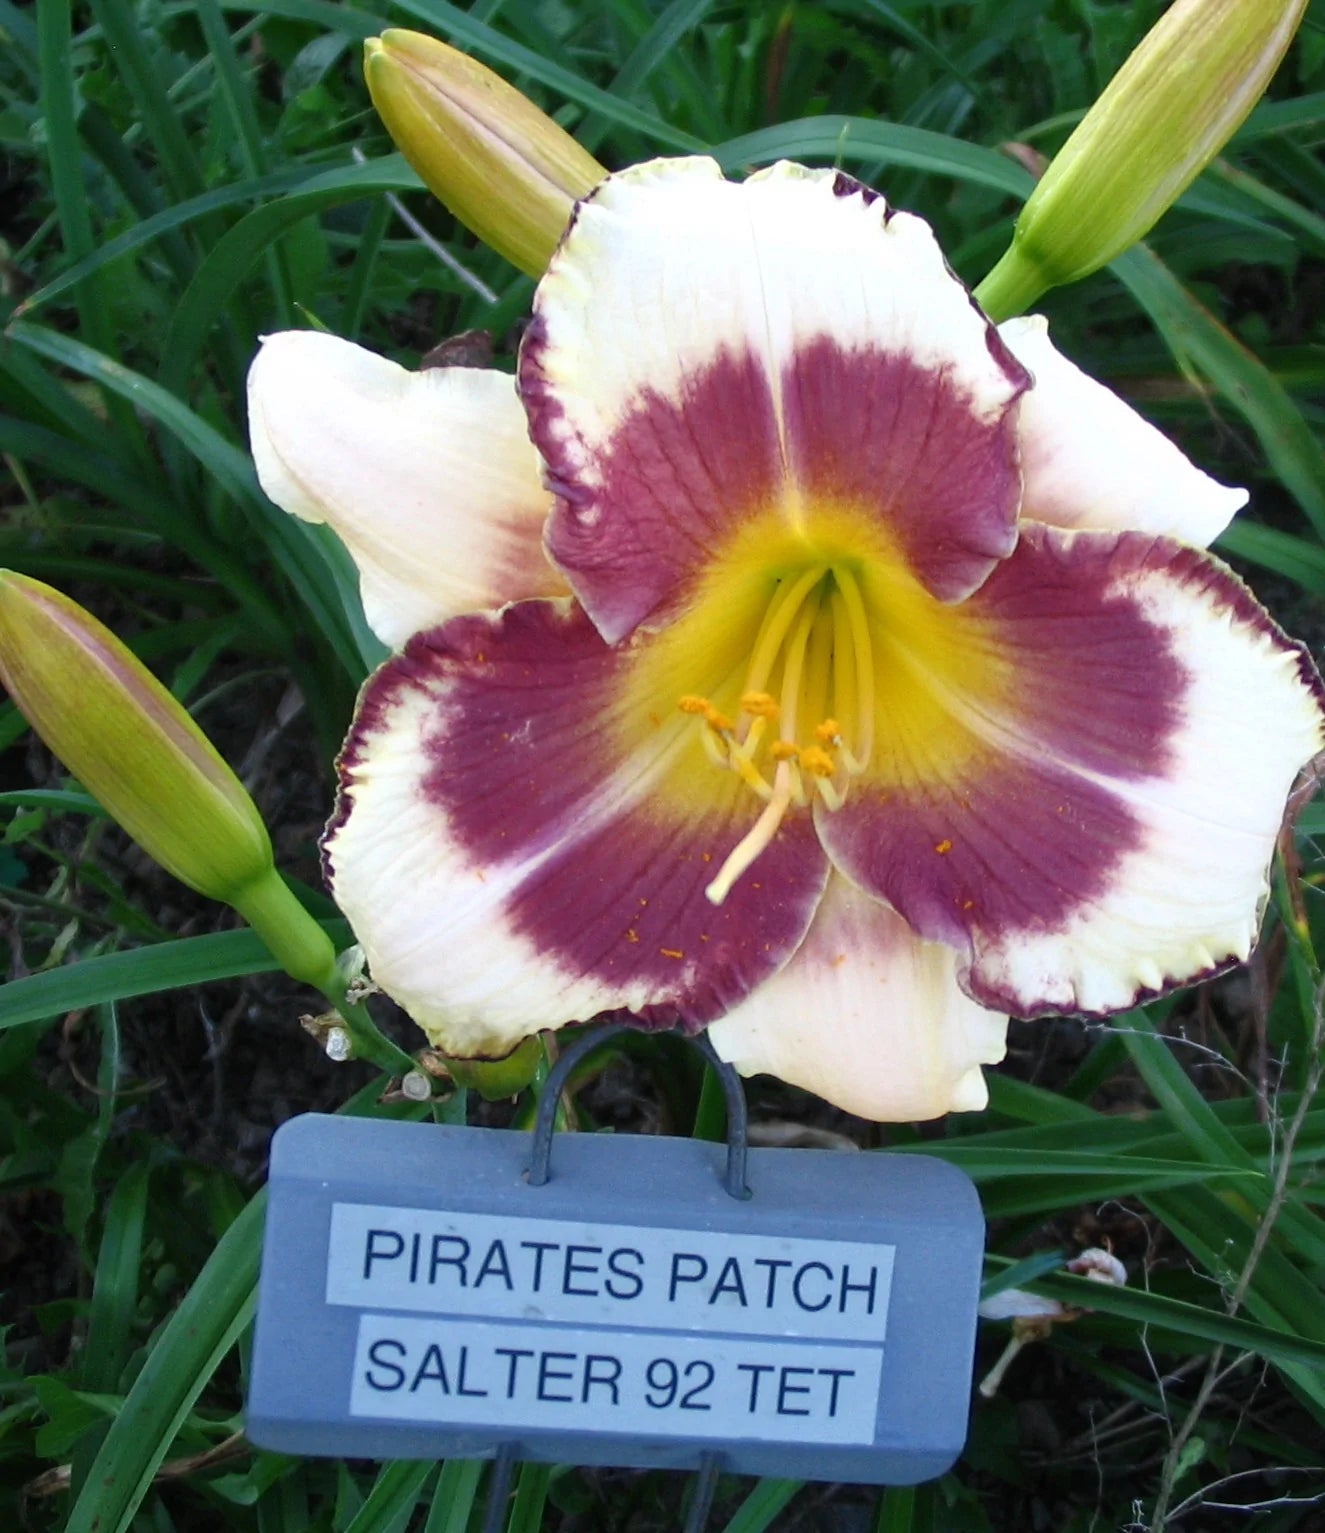 PIRATE'S PATCH